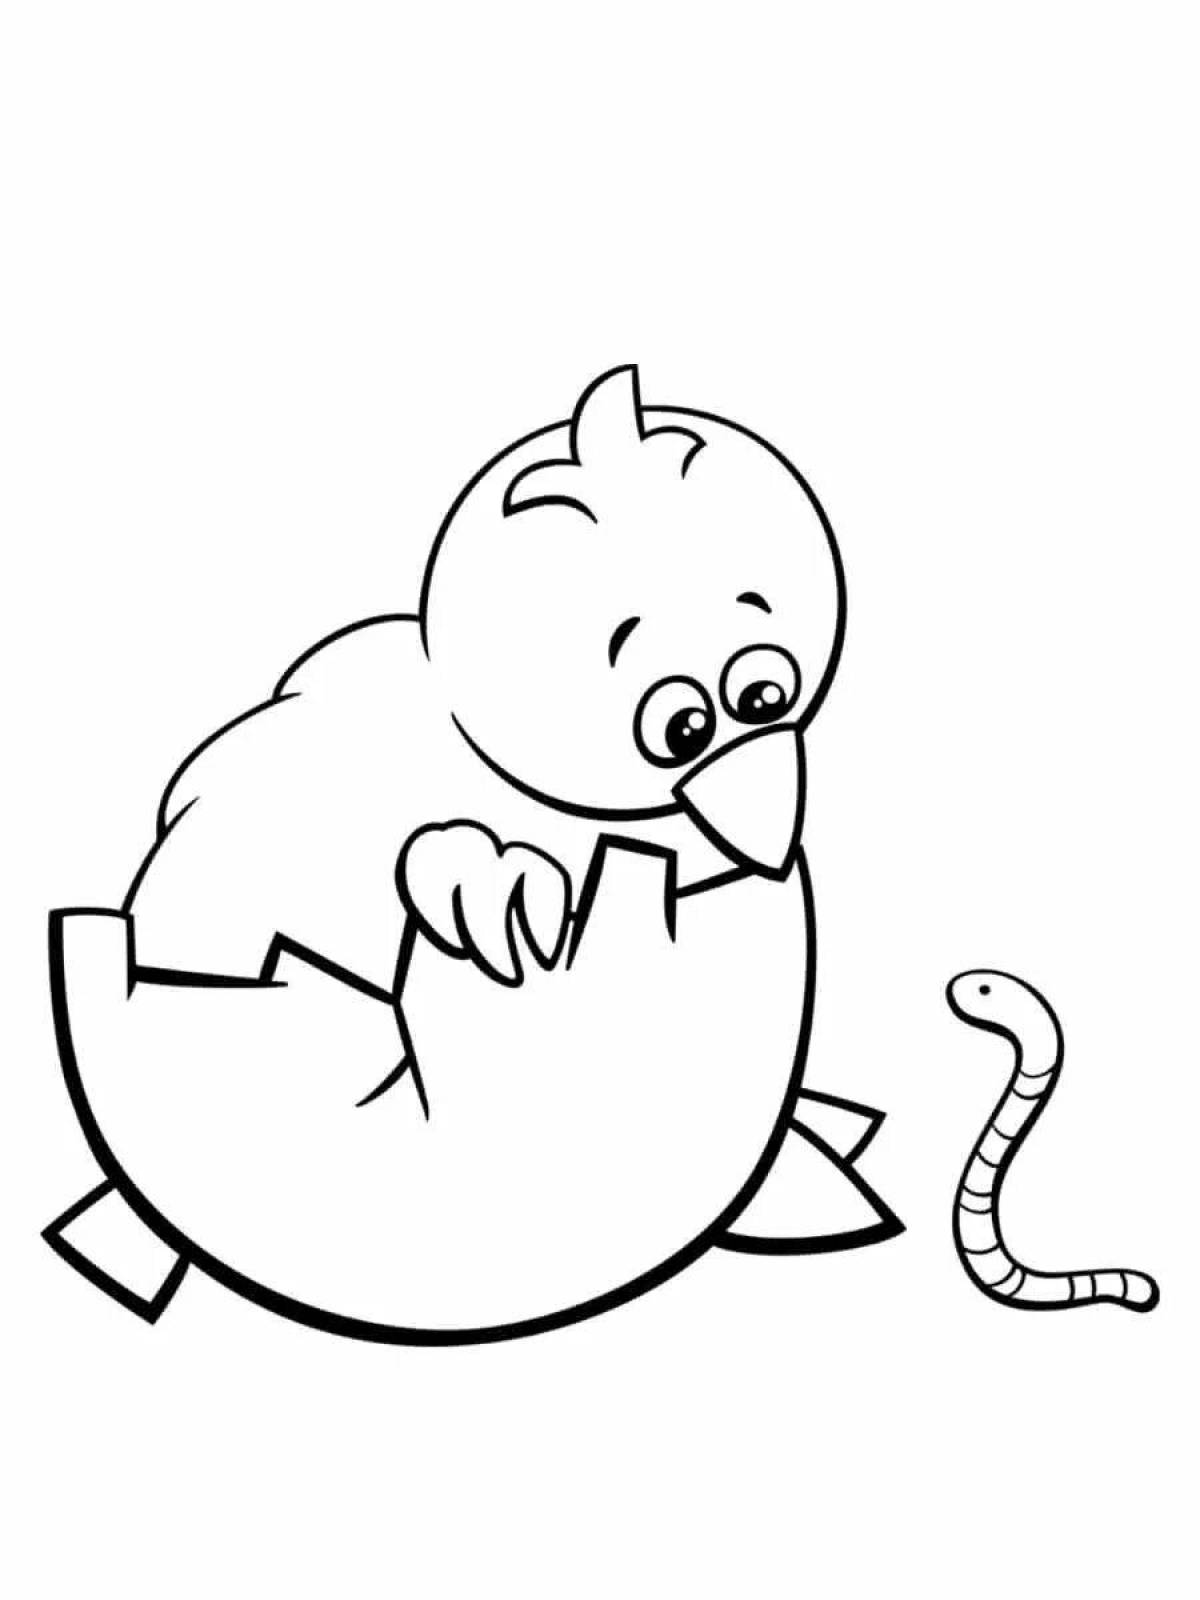 Animated chick and duckling coloring page